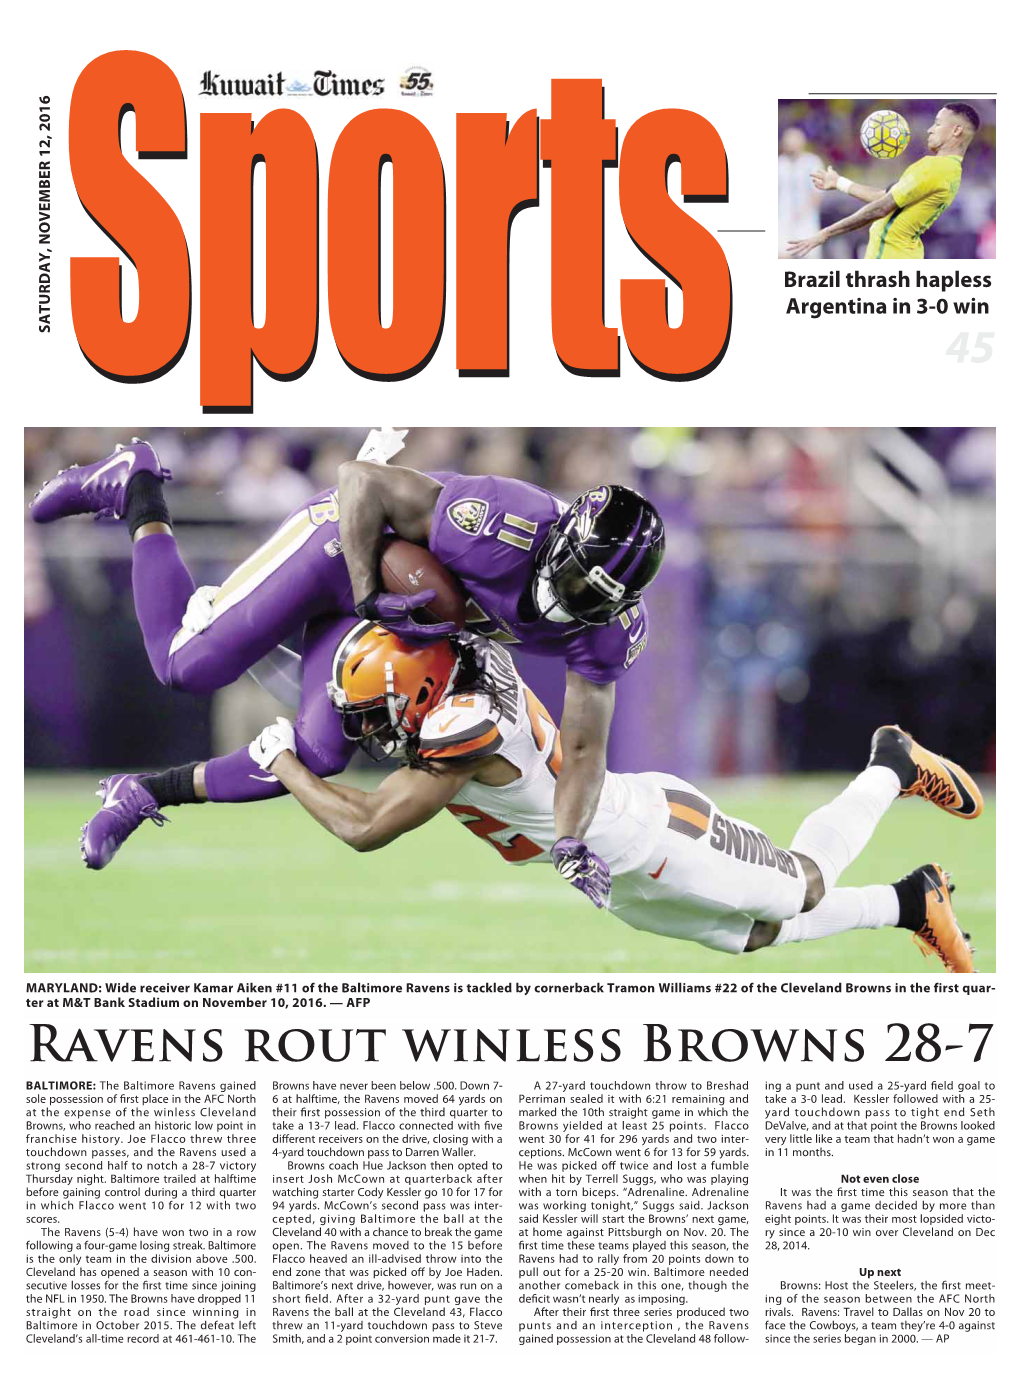 Ravens Rout Winless Browns 28-7